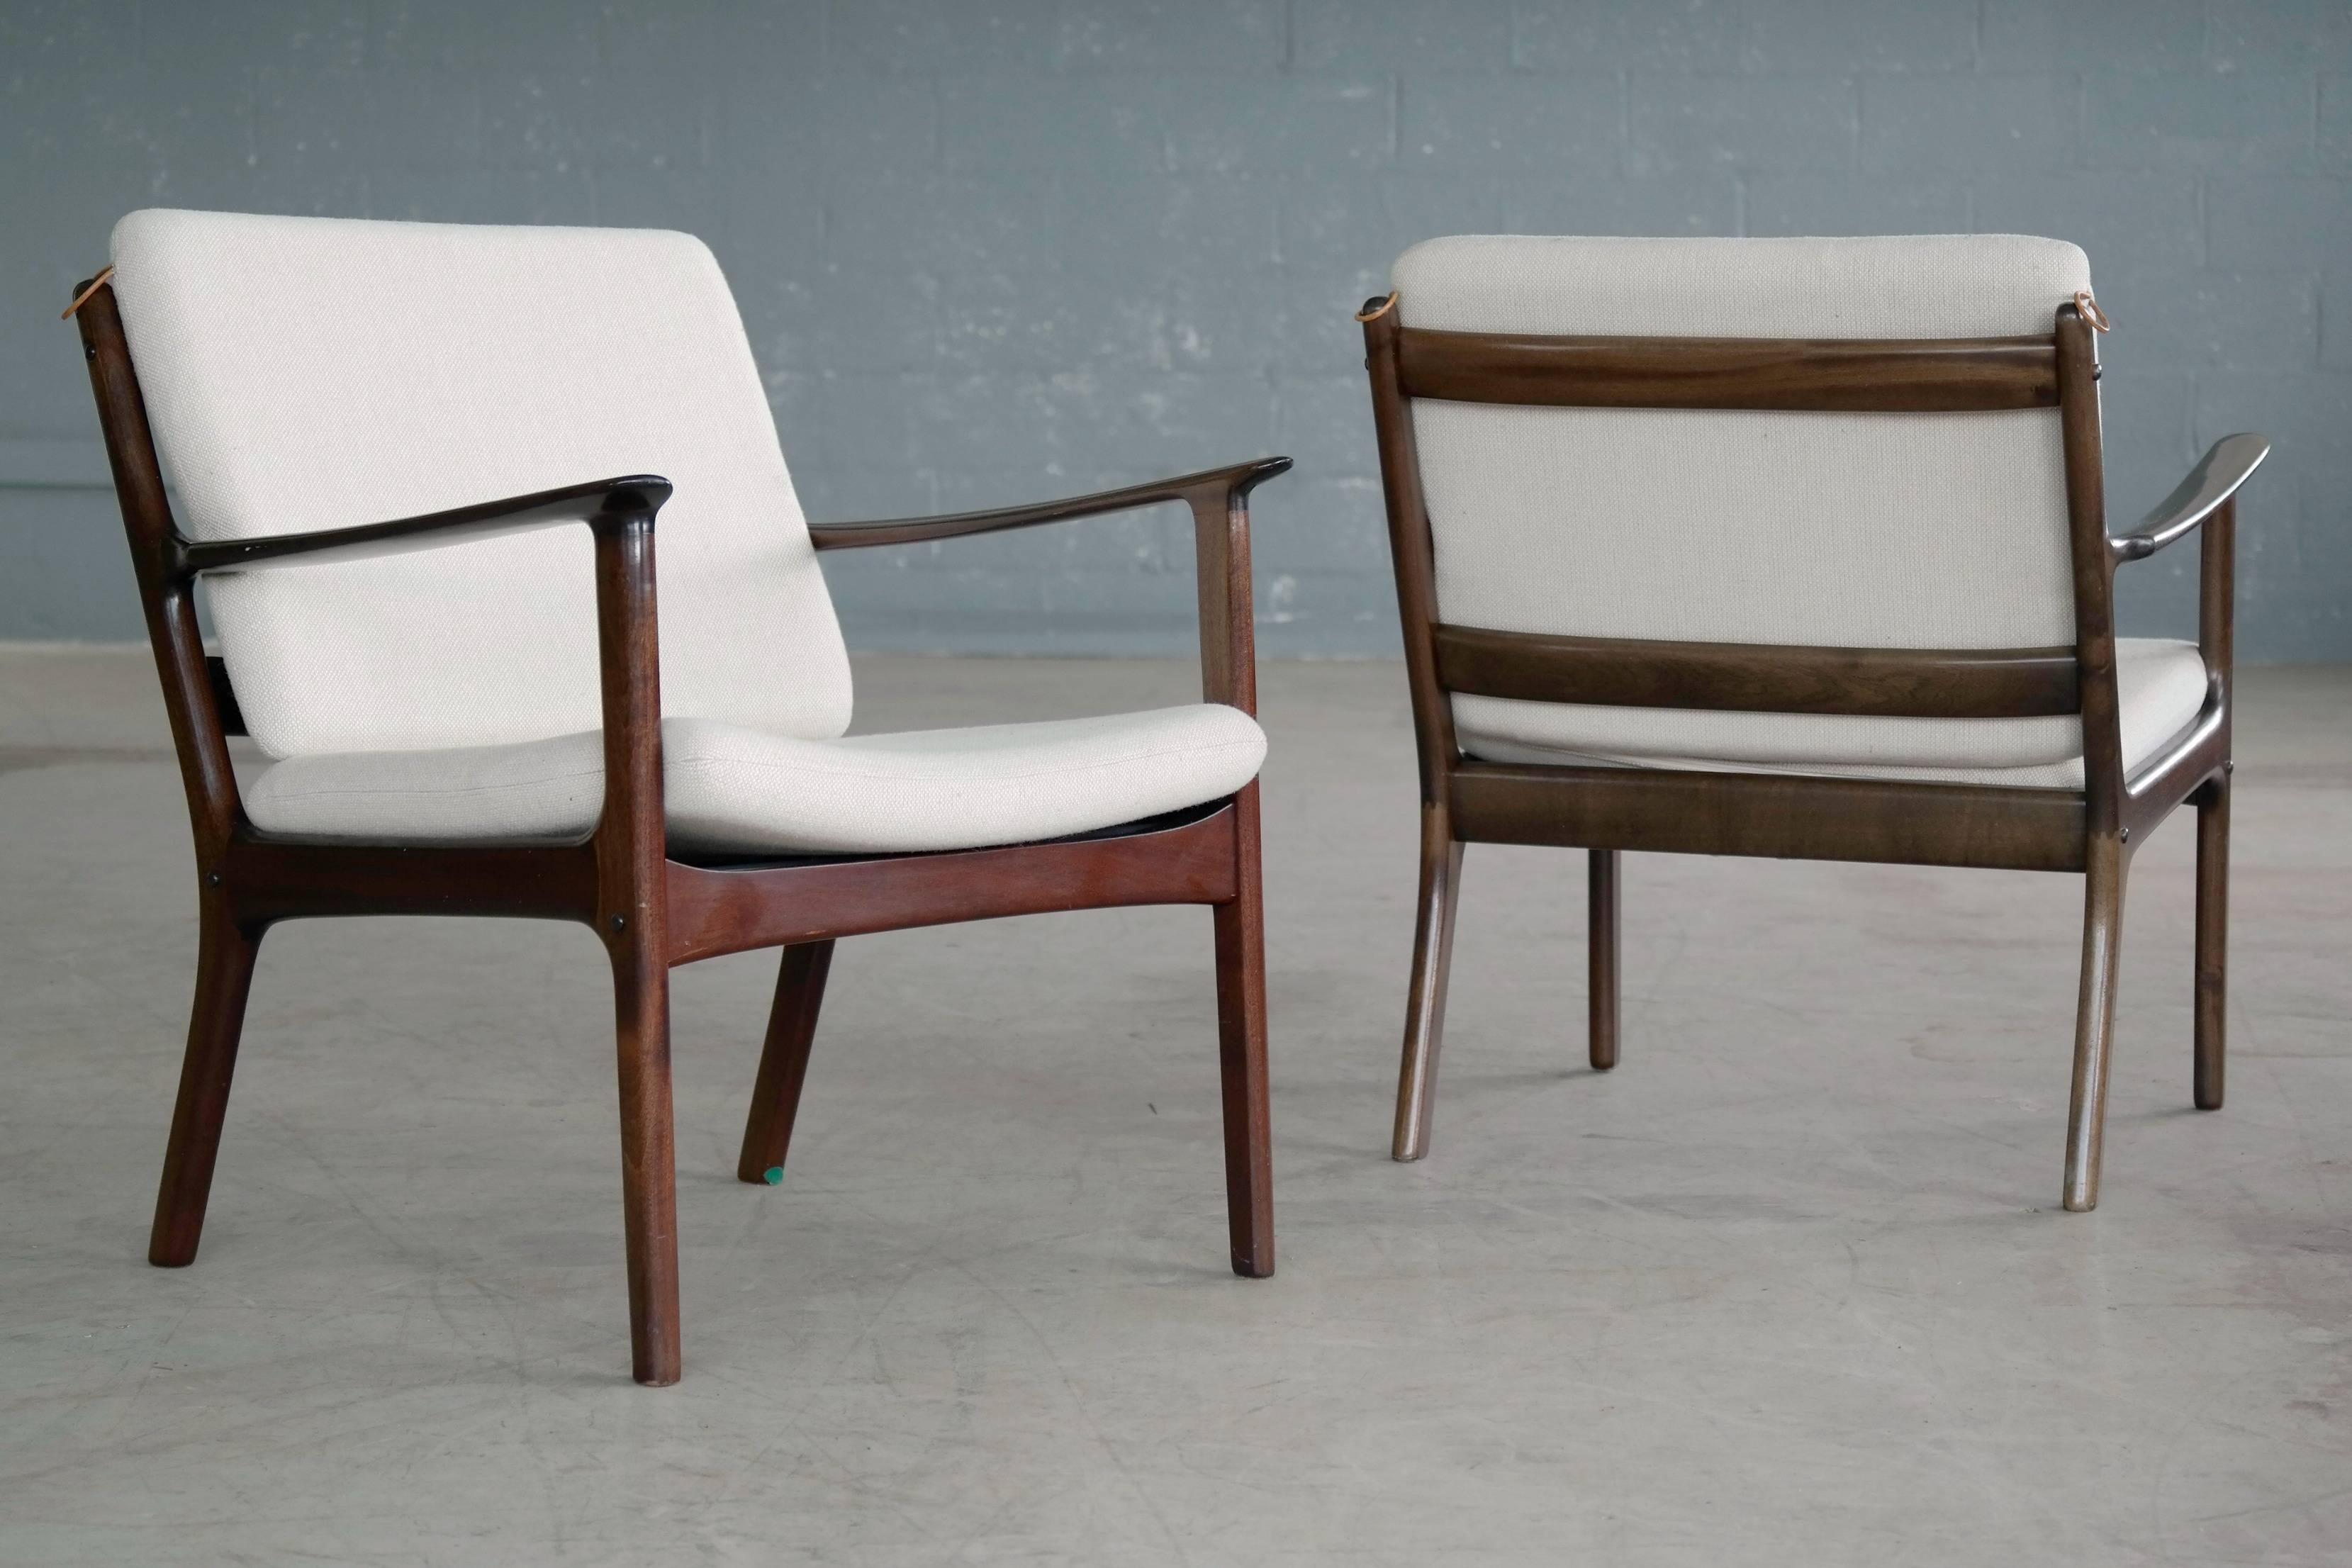 Classic Ole Wanscher design pair of easy chairs model PJ 112 designed in 1951 and produced P. Jeppesen Møbelfabrik. Marked accordingly model PJ 112 to the frame. The back has a bit of sun fading on the wood. White original wool cushions with leather